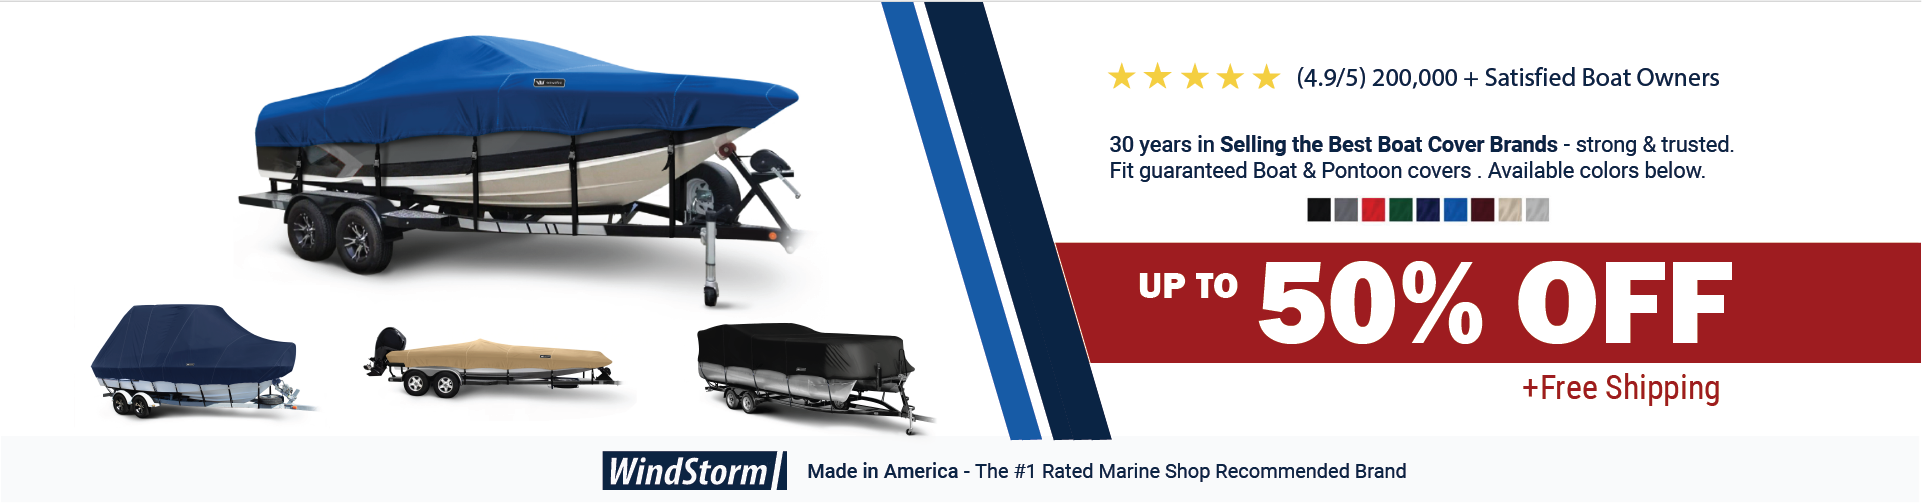 National Boat Covers - Factory Fit & Strongest Warranties!